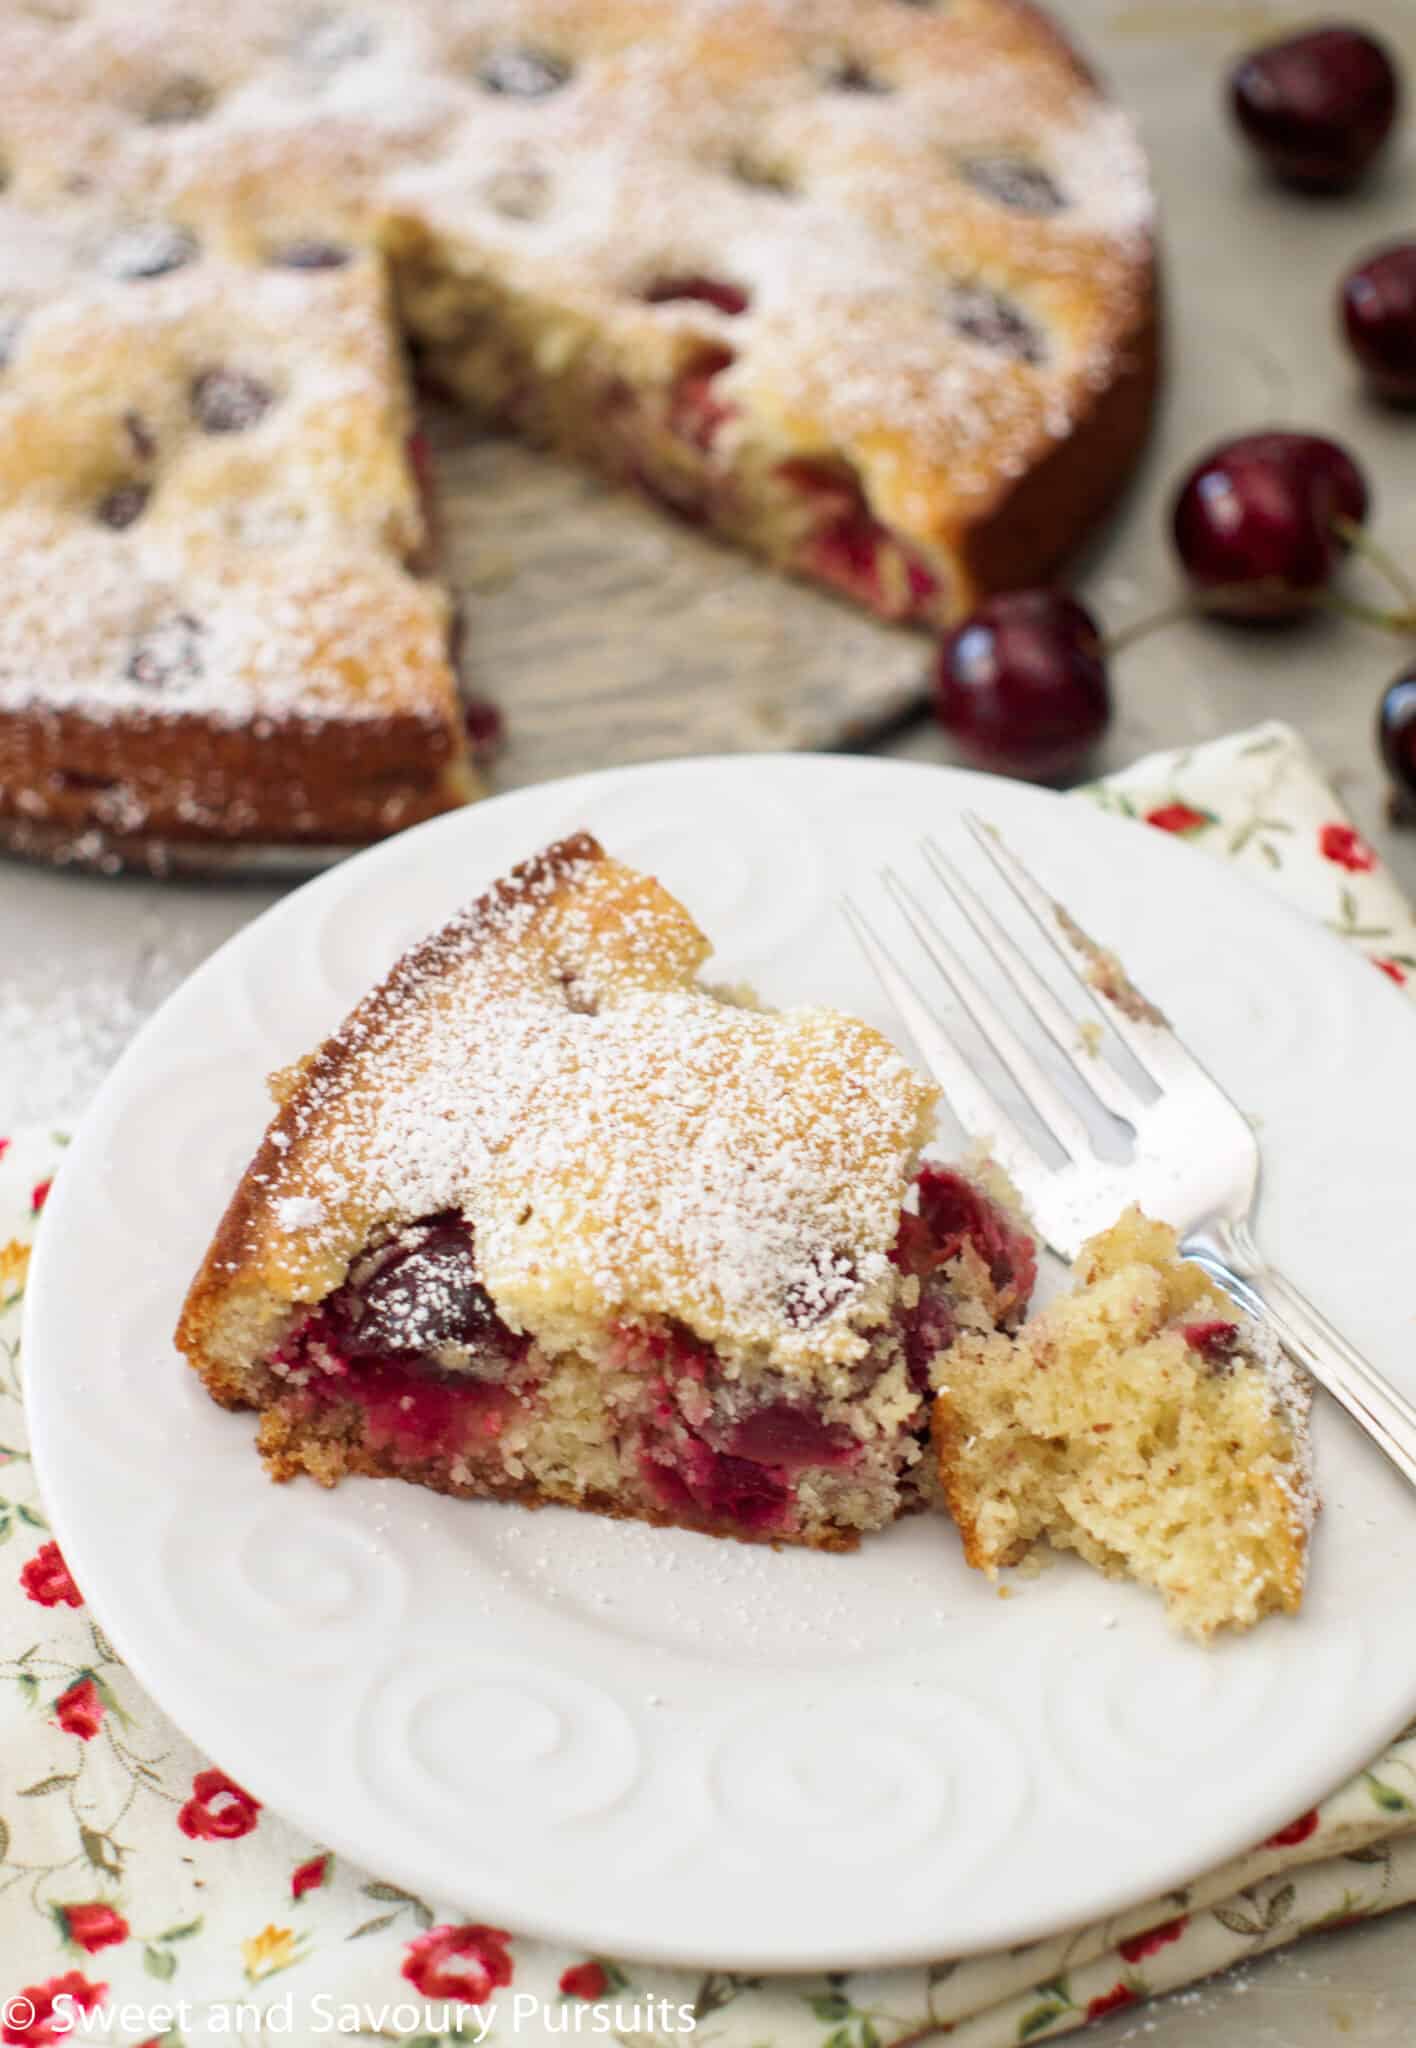 Slice of Cherry Almond Cake with a dusting of powdered sugar on white dish.